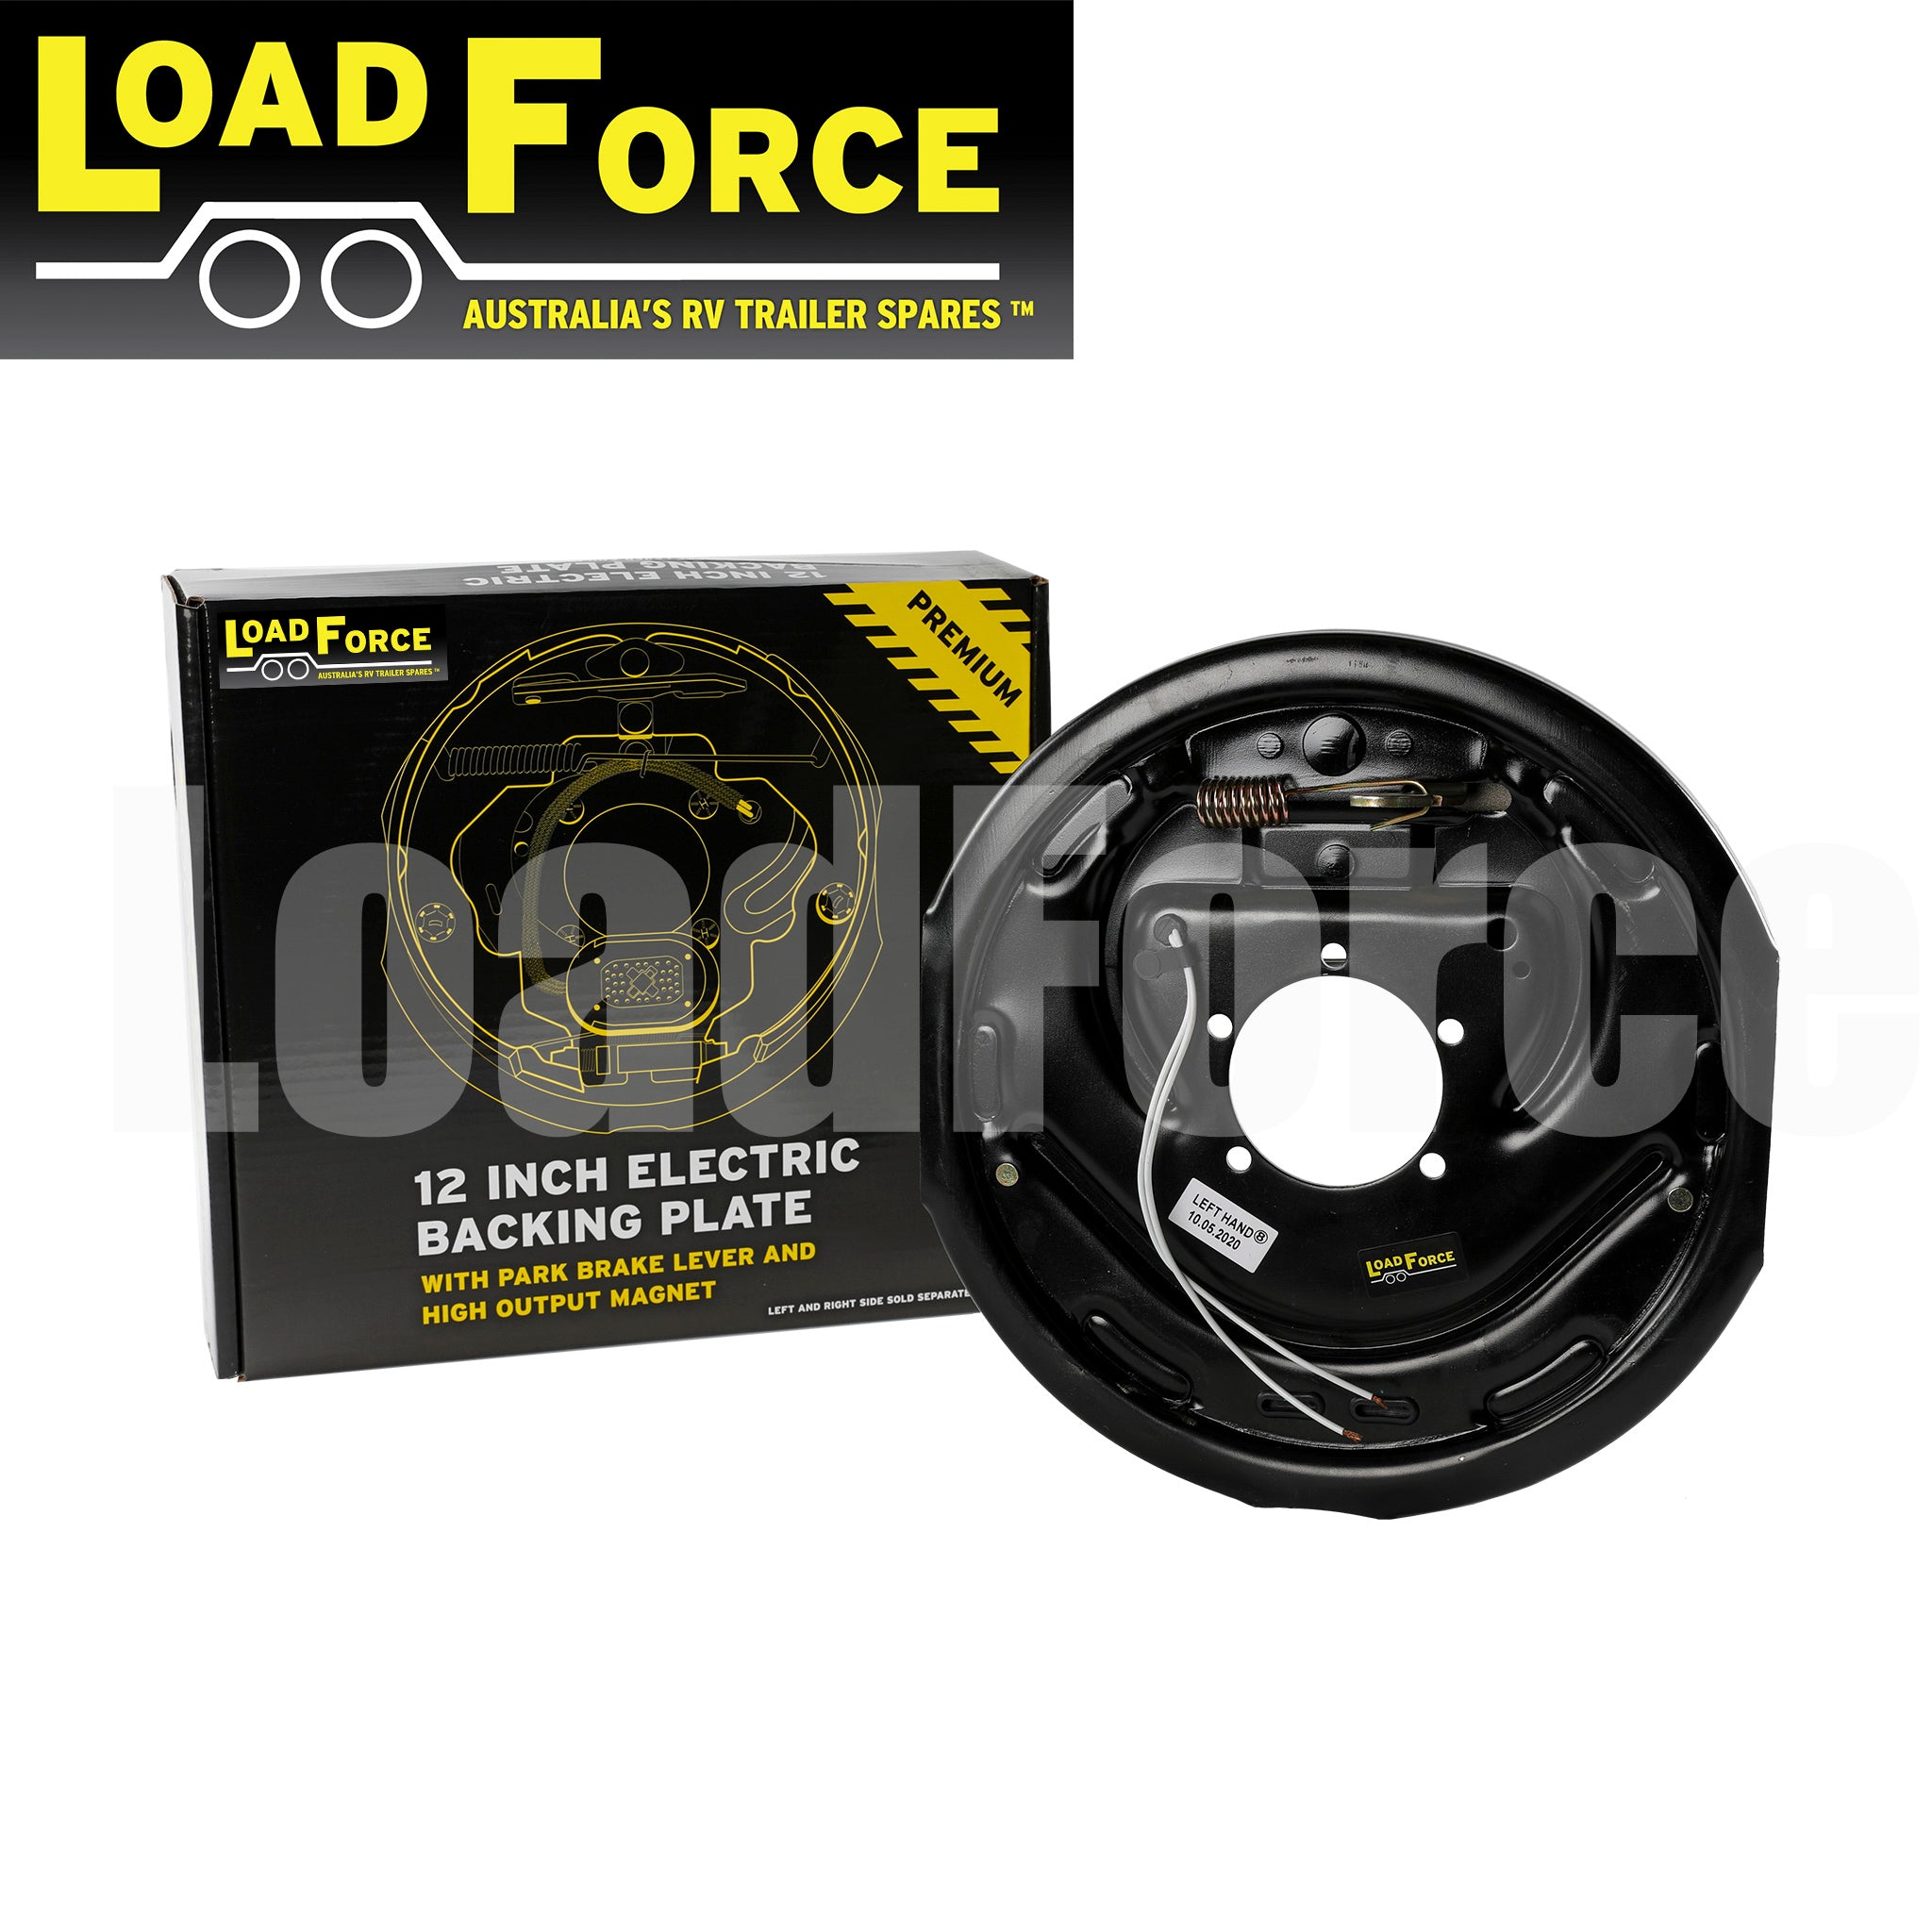 LoadForce 12 inch left hand electric backing plate assembly with park brake